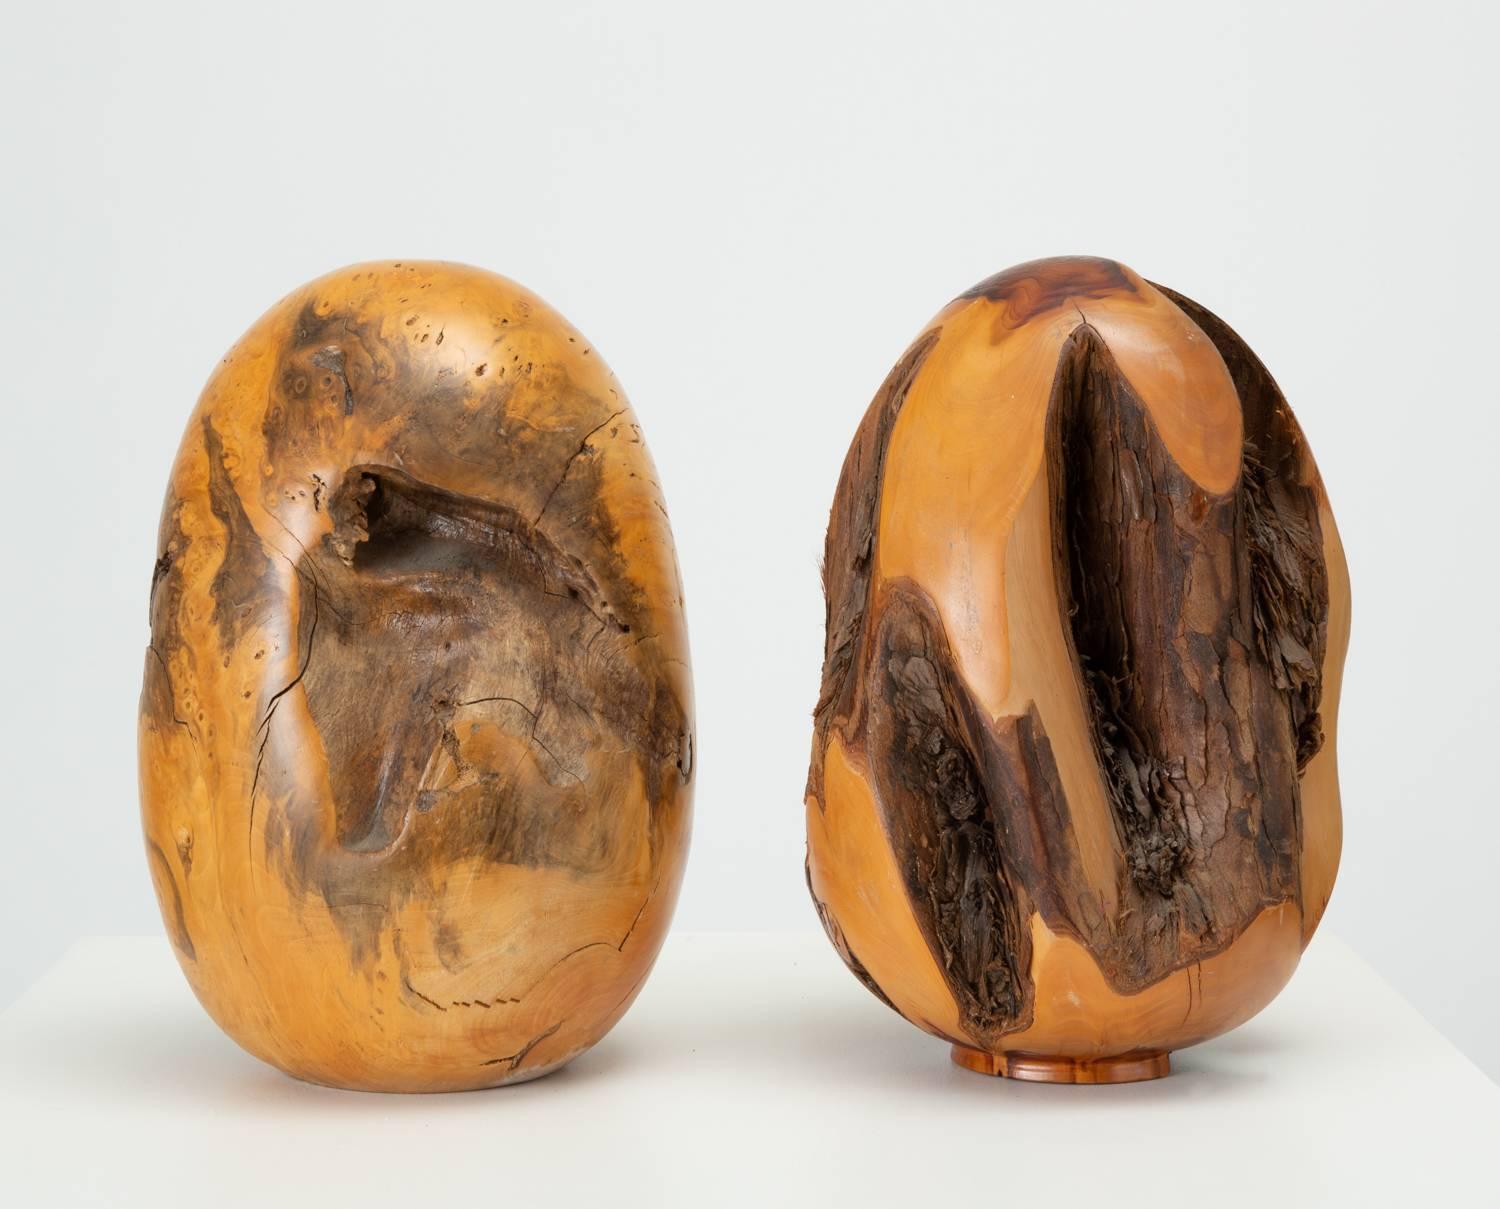 A Sebastopol, CA-based woodworker and tree nursery proprietor, Chuck McLaughlin specialized in turned wood bowls, vases, and objects d’art. Two examples are available, each with an egg shape that celebrates the natural textures and irregularities of